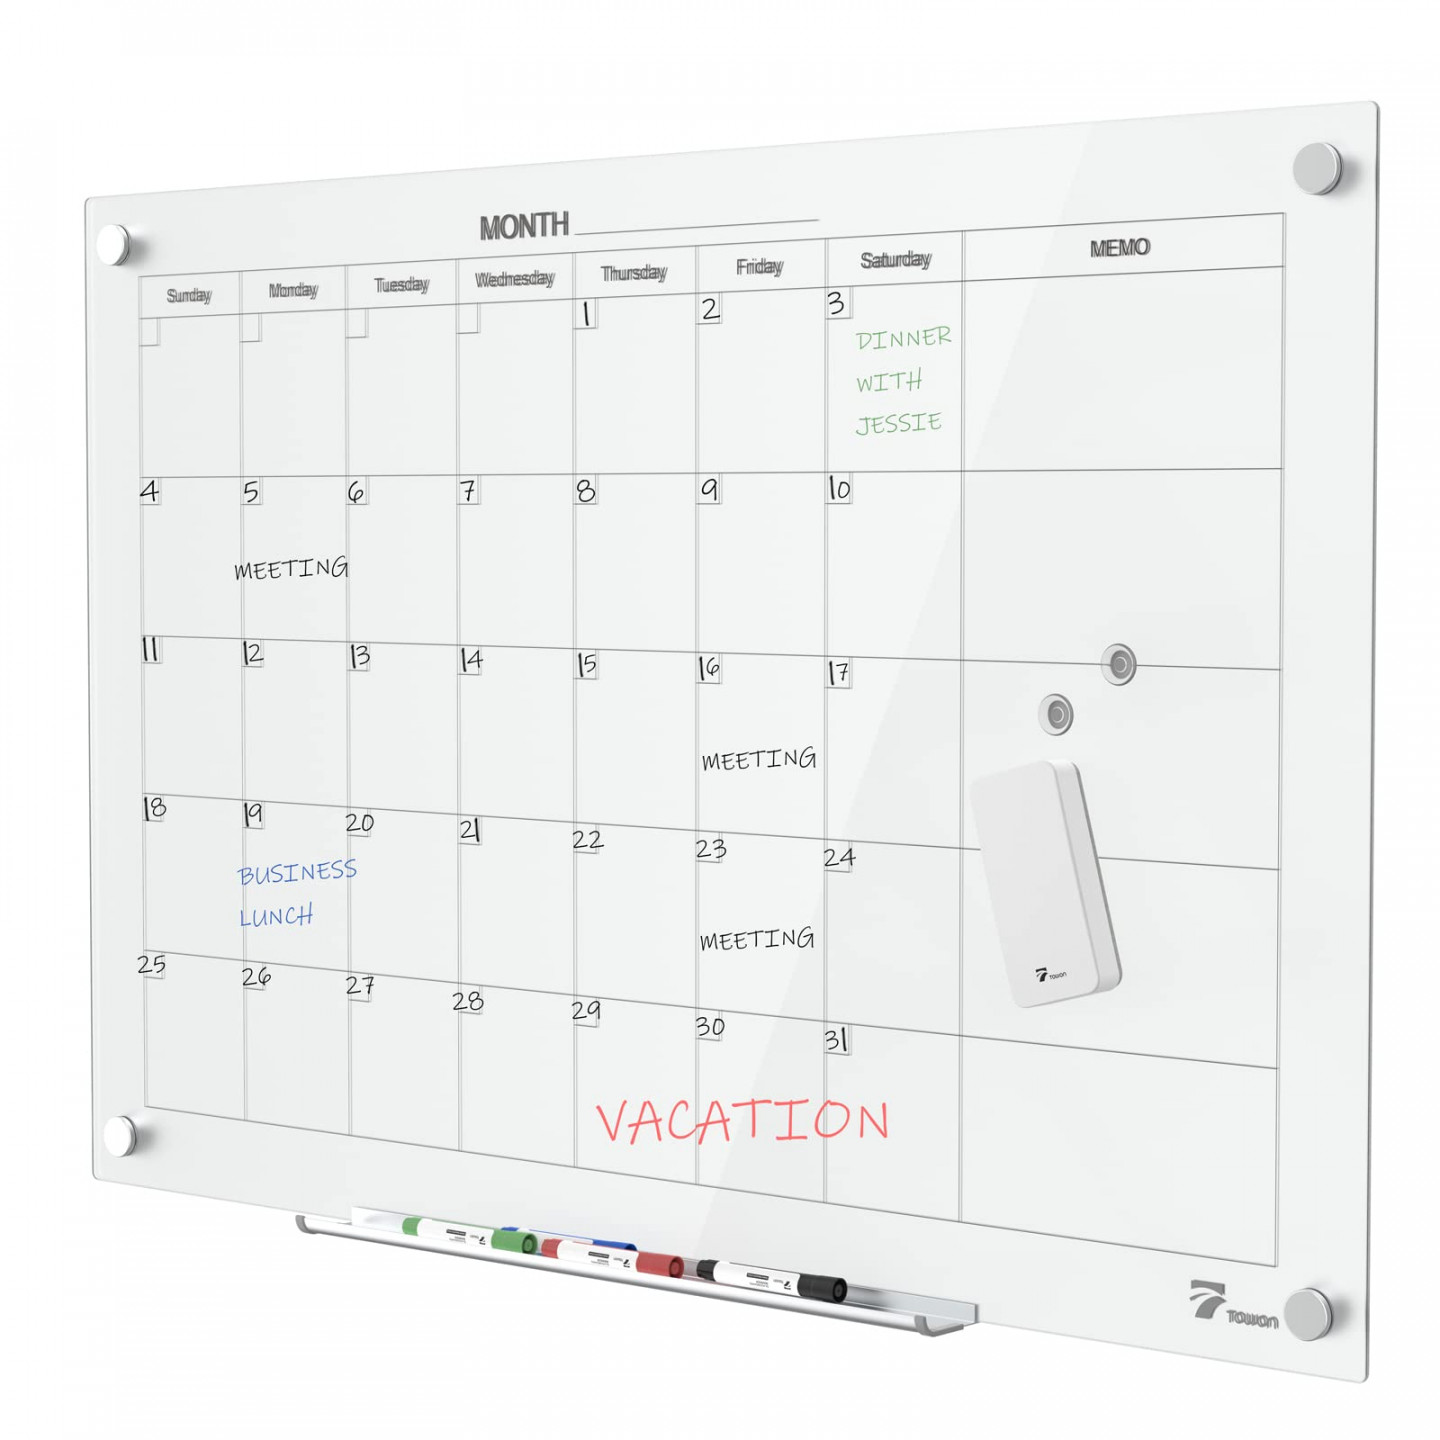 TOWON Large Glass Dry Erase Calendar for Wall,  x  Inch Glass Calendar  Dry Erase Board, MagneticSee more TOWON Large Glass Dry Erase Calendar for